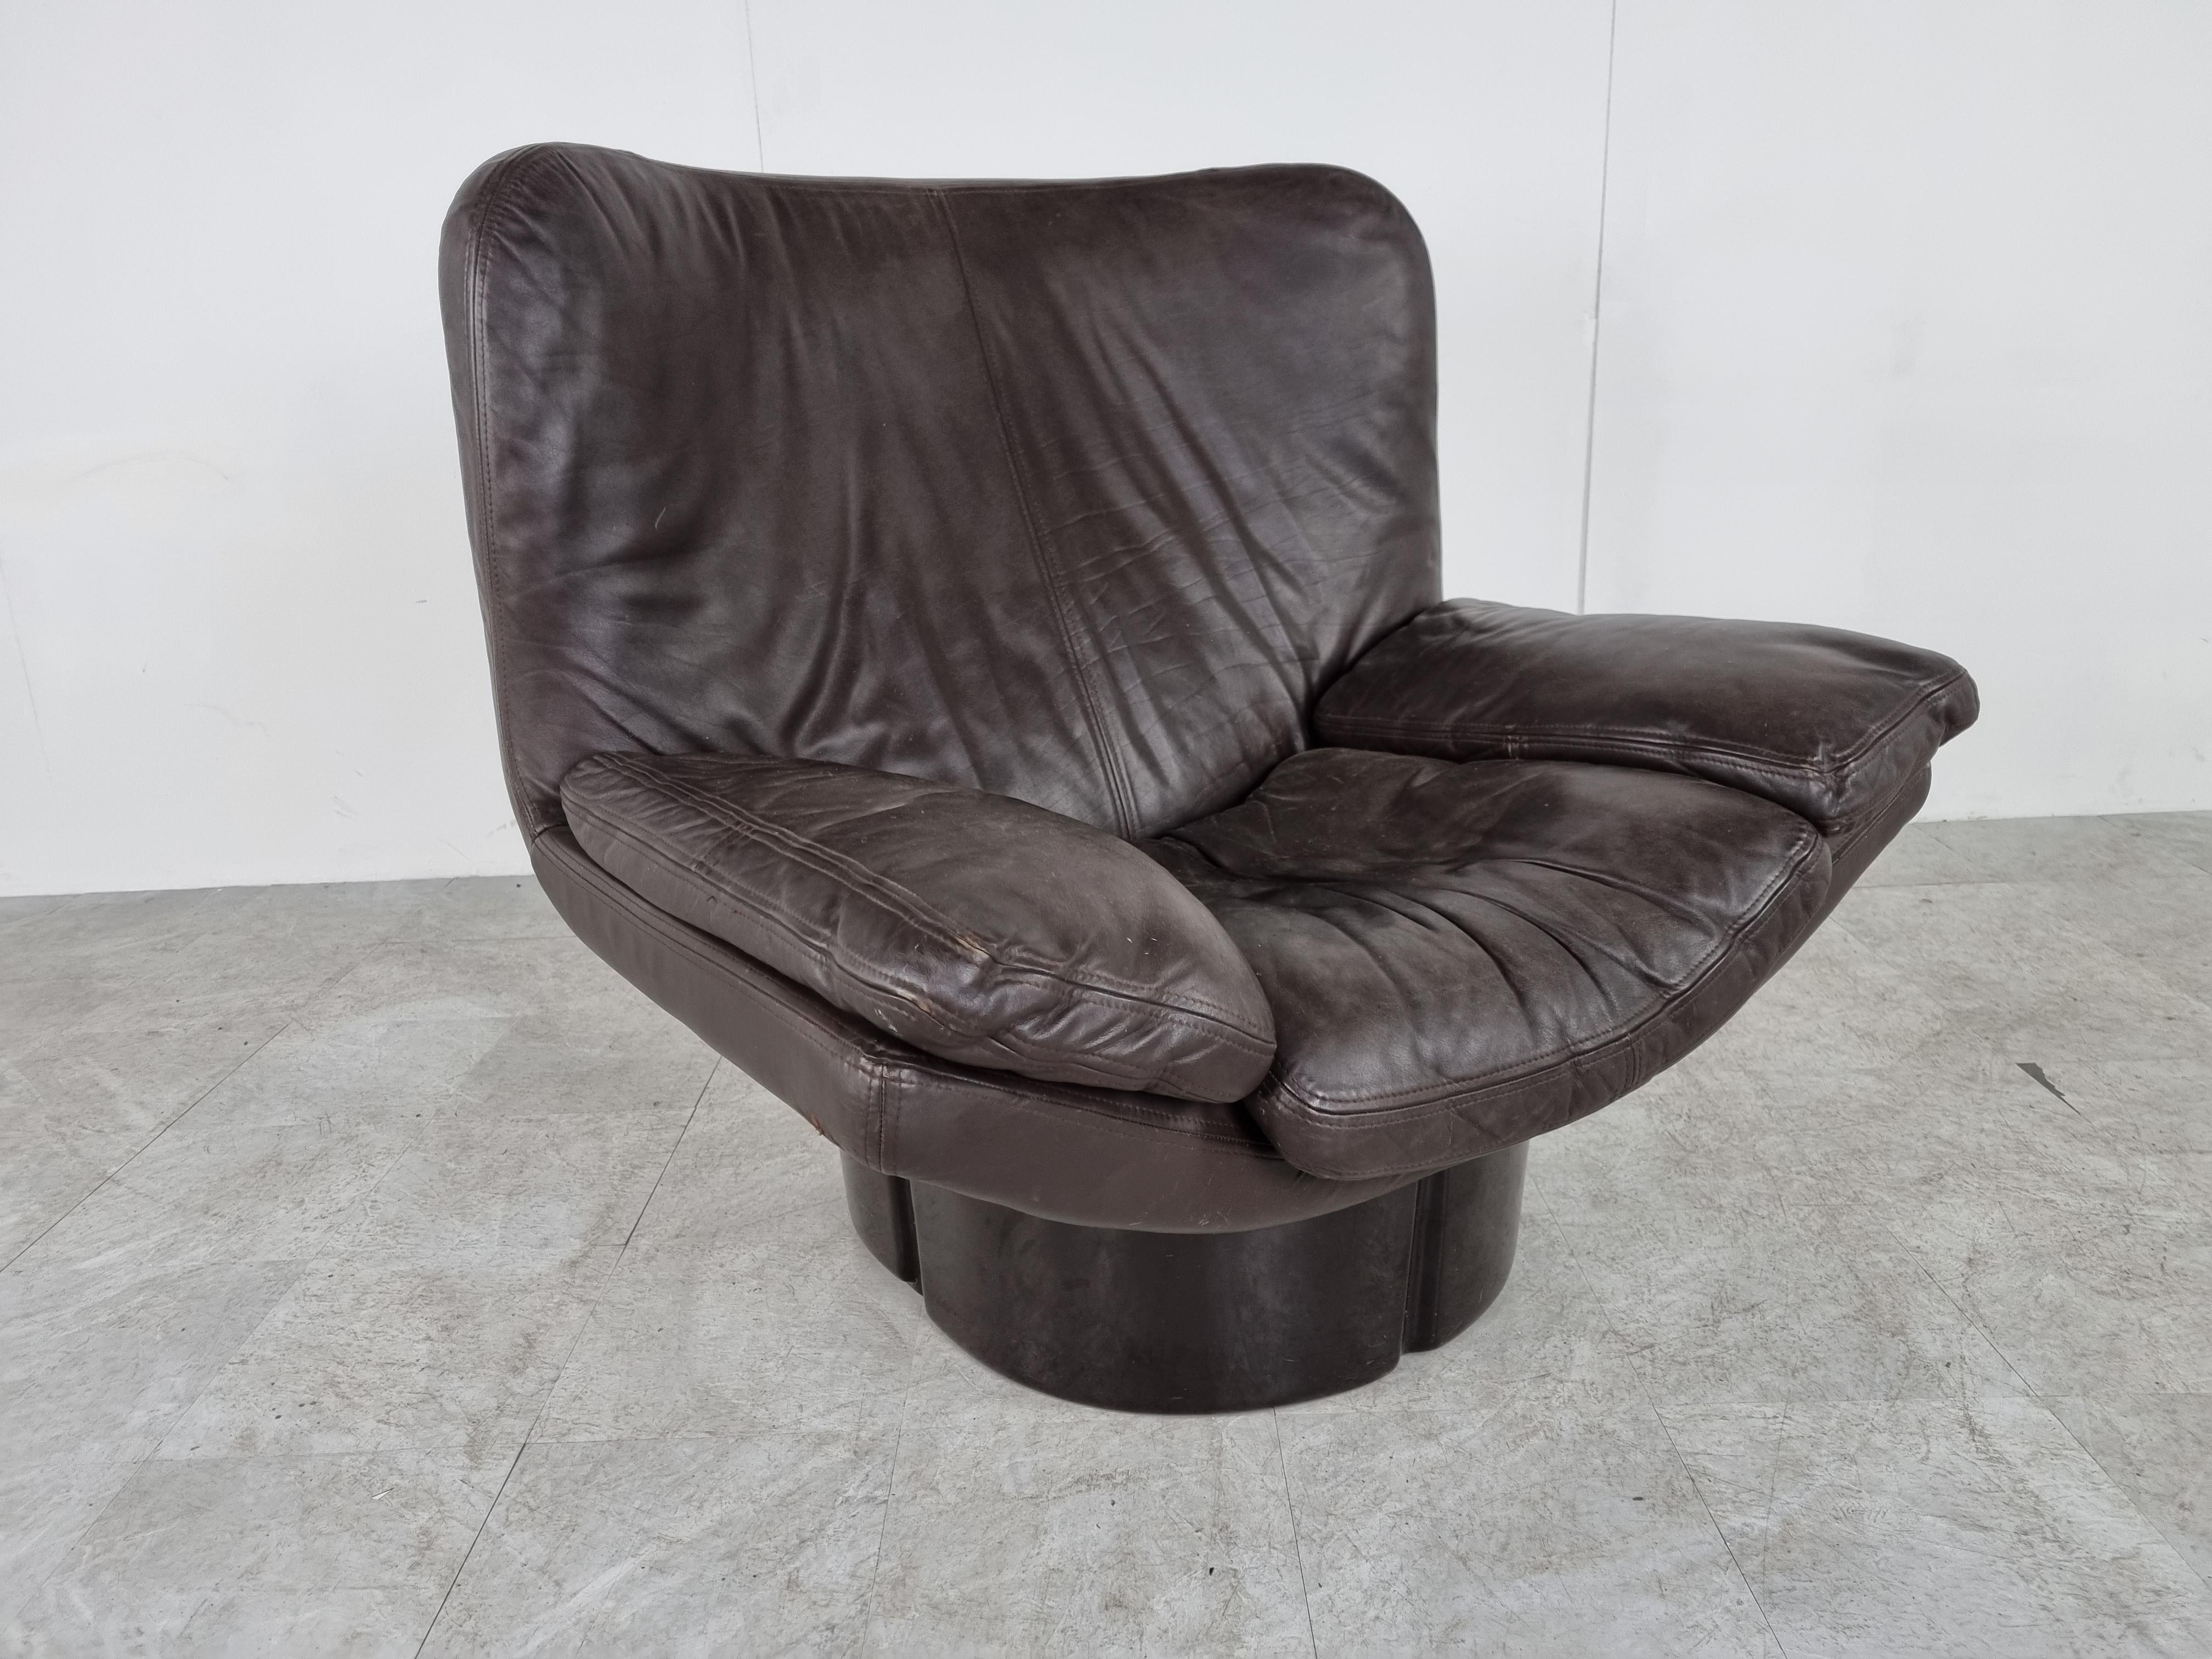 Vintage lounge chair (model Il Potrone) was designed for Comfort in Italy as part of the Il Poltoni 175 series by T. Ammannati and G.P. Vitelli in 1973.

Comes with the original brown leather upholstery.

Beautiful space age design fiberglass